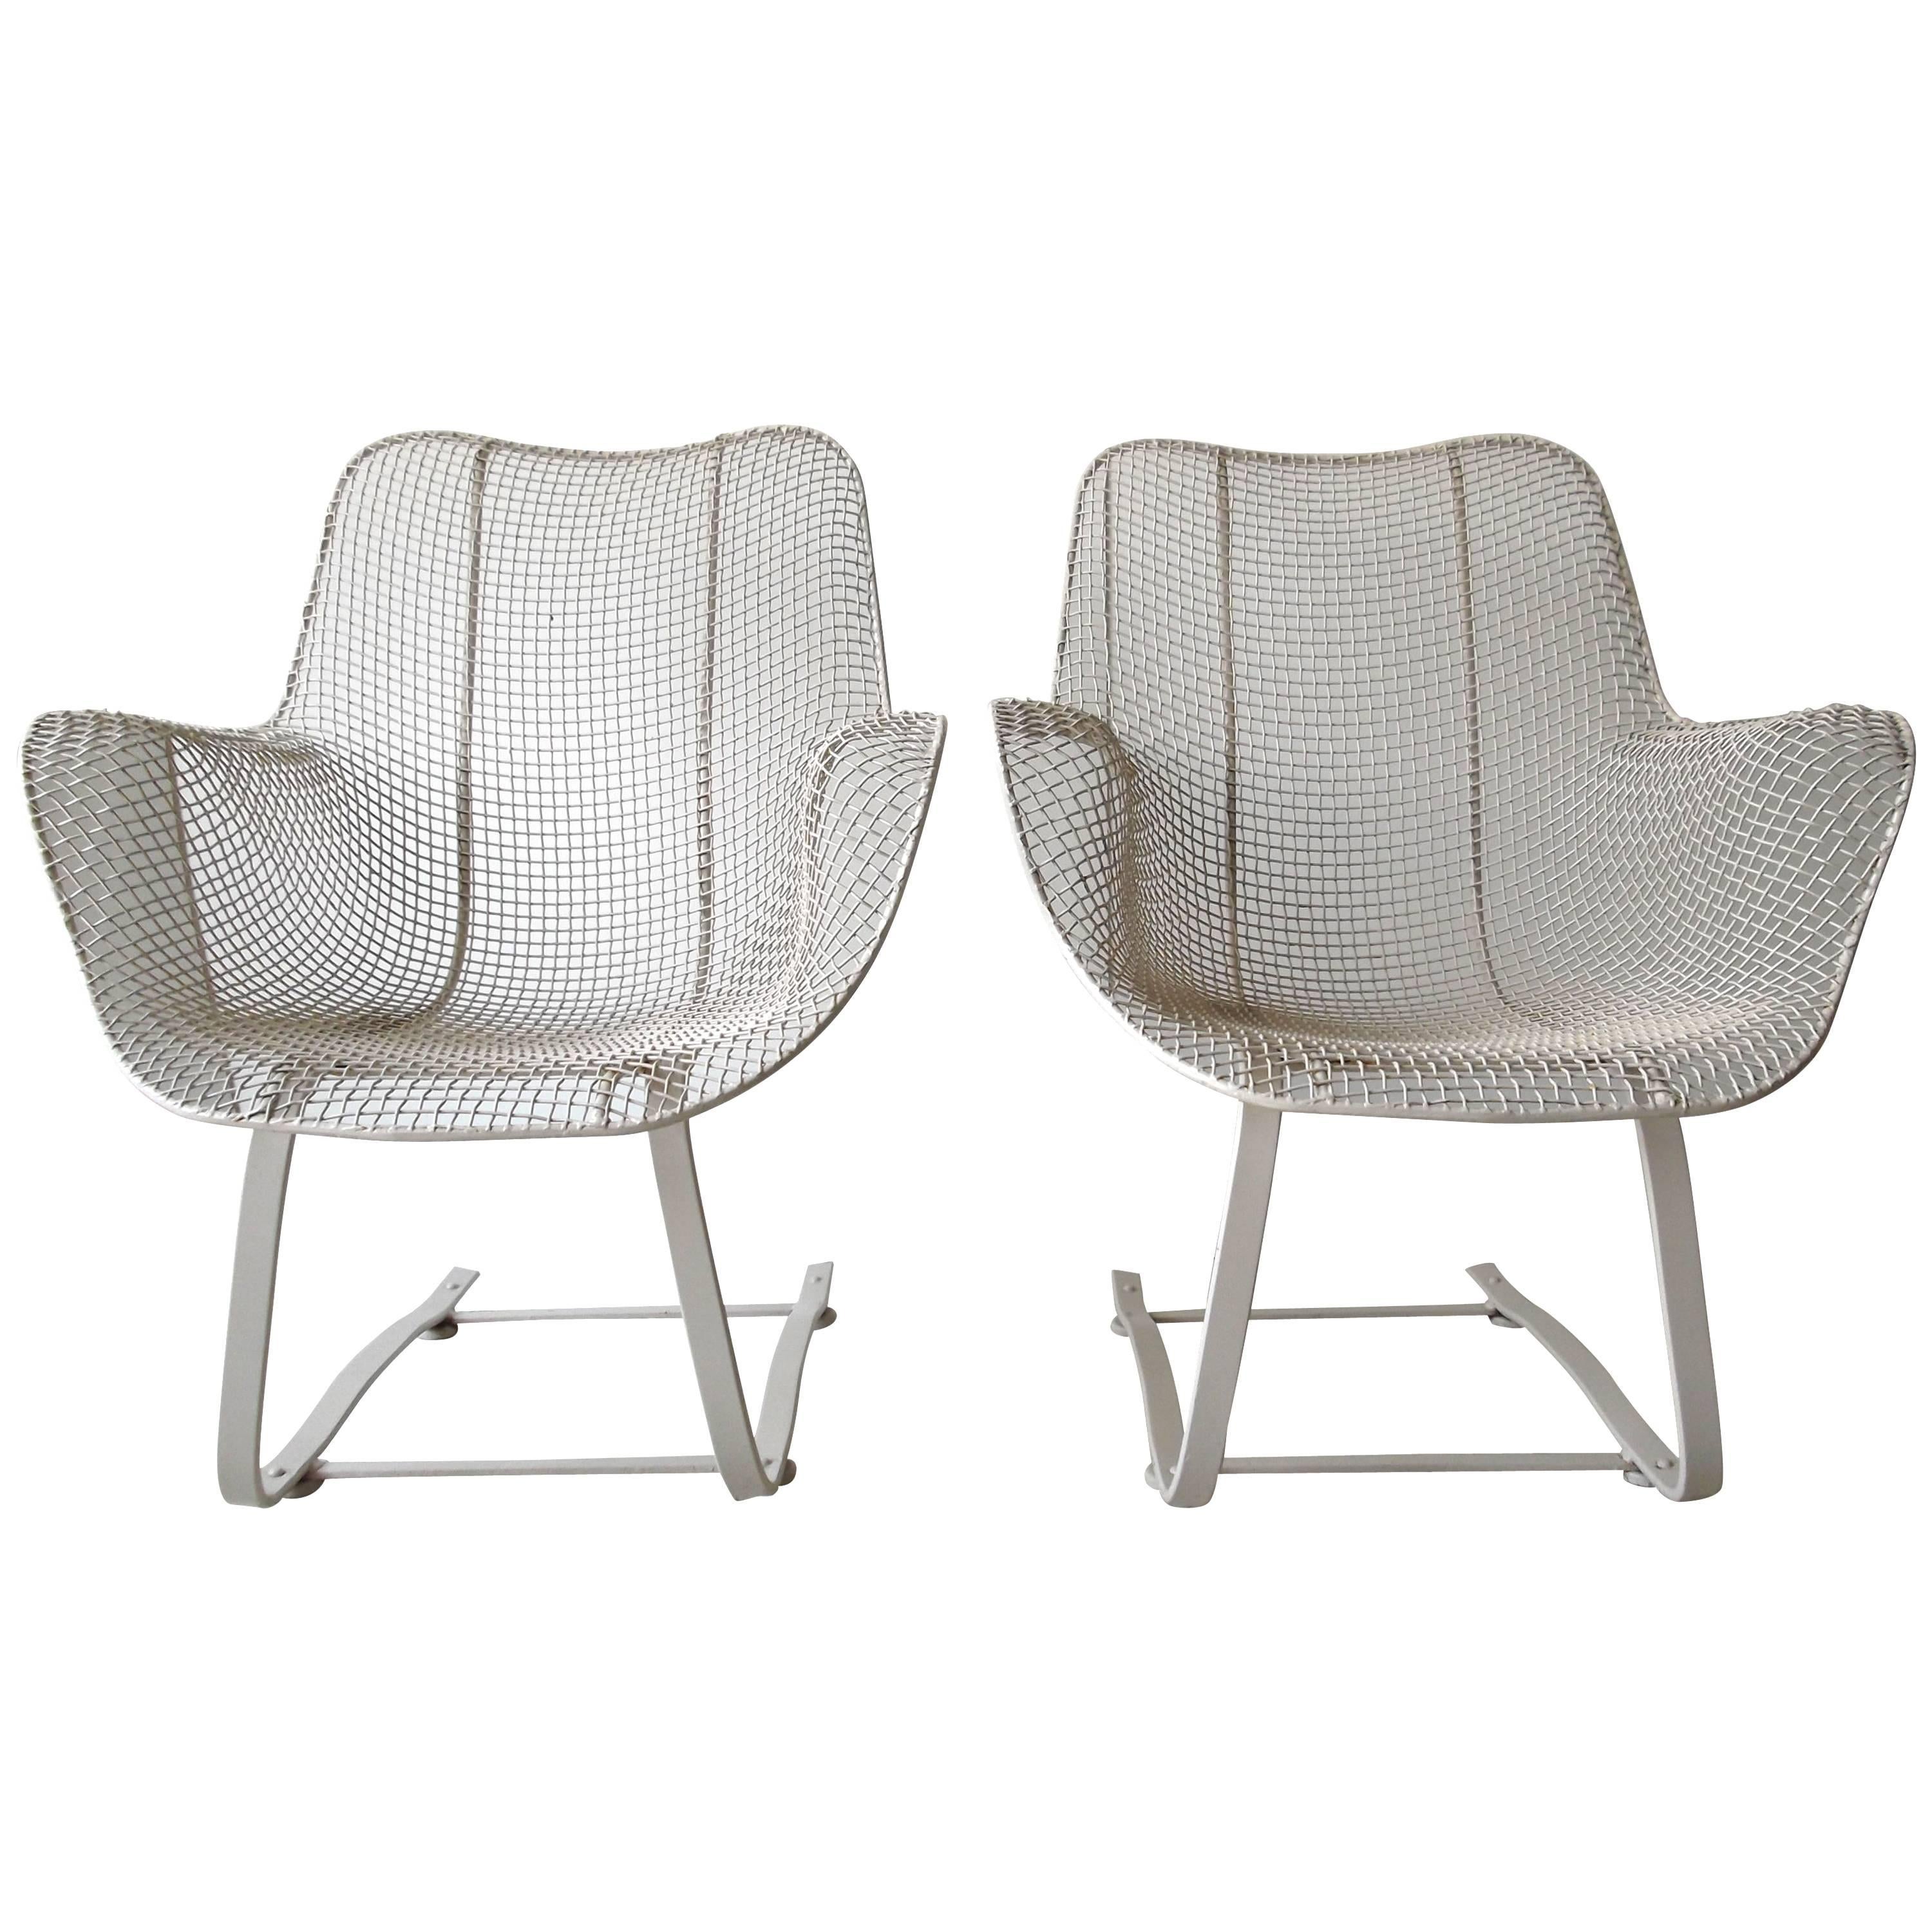 Woodard Sculptura Springer Patio Lounge Chairs For Sale